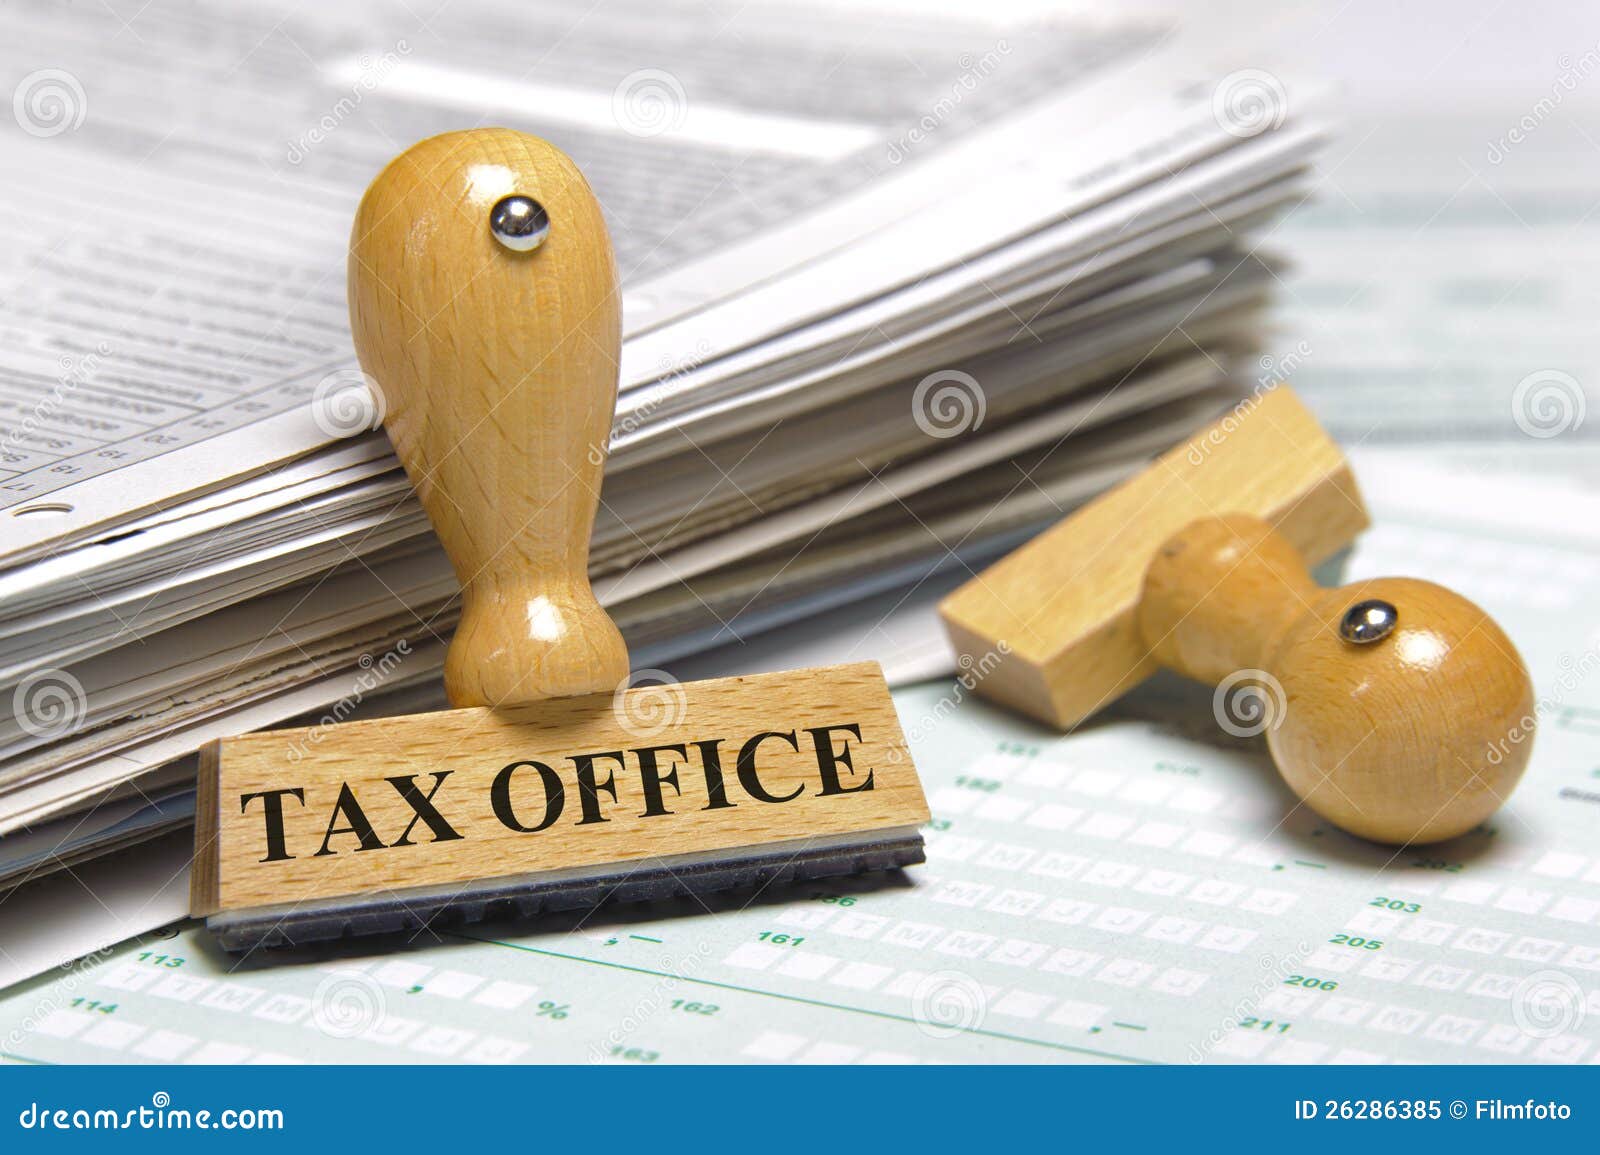 Tax Office Royalty Free Stock Photo - Image: 26286385